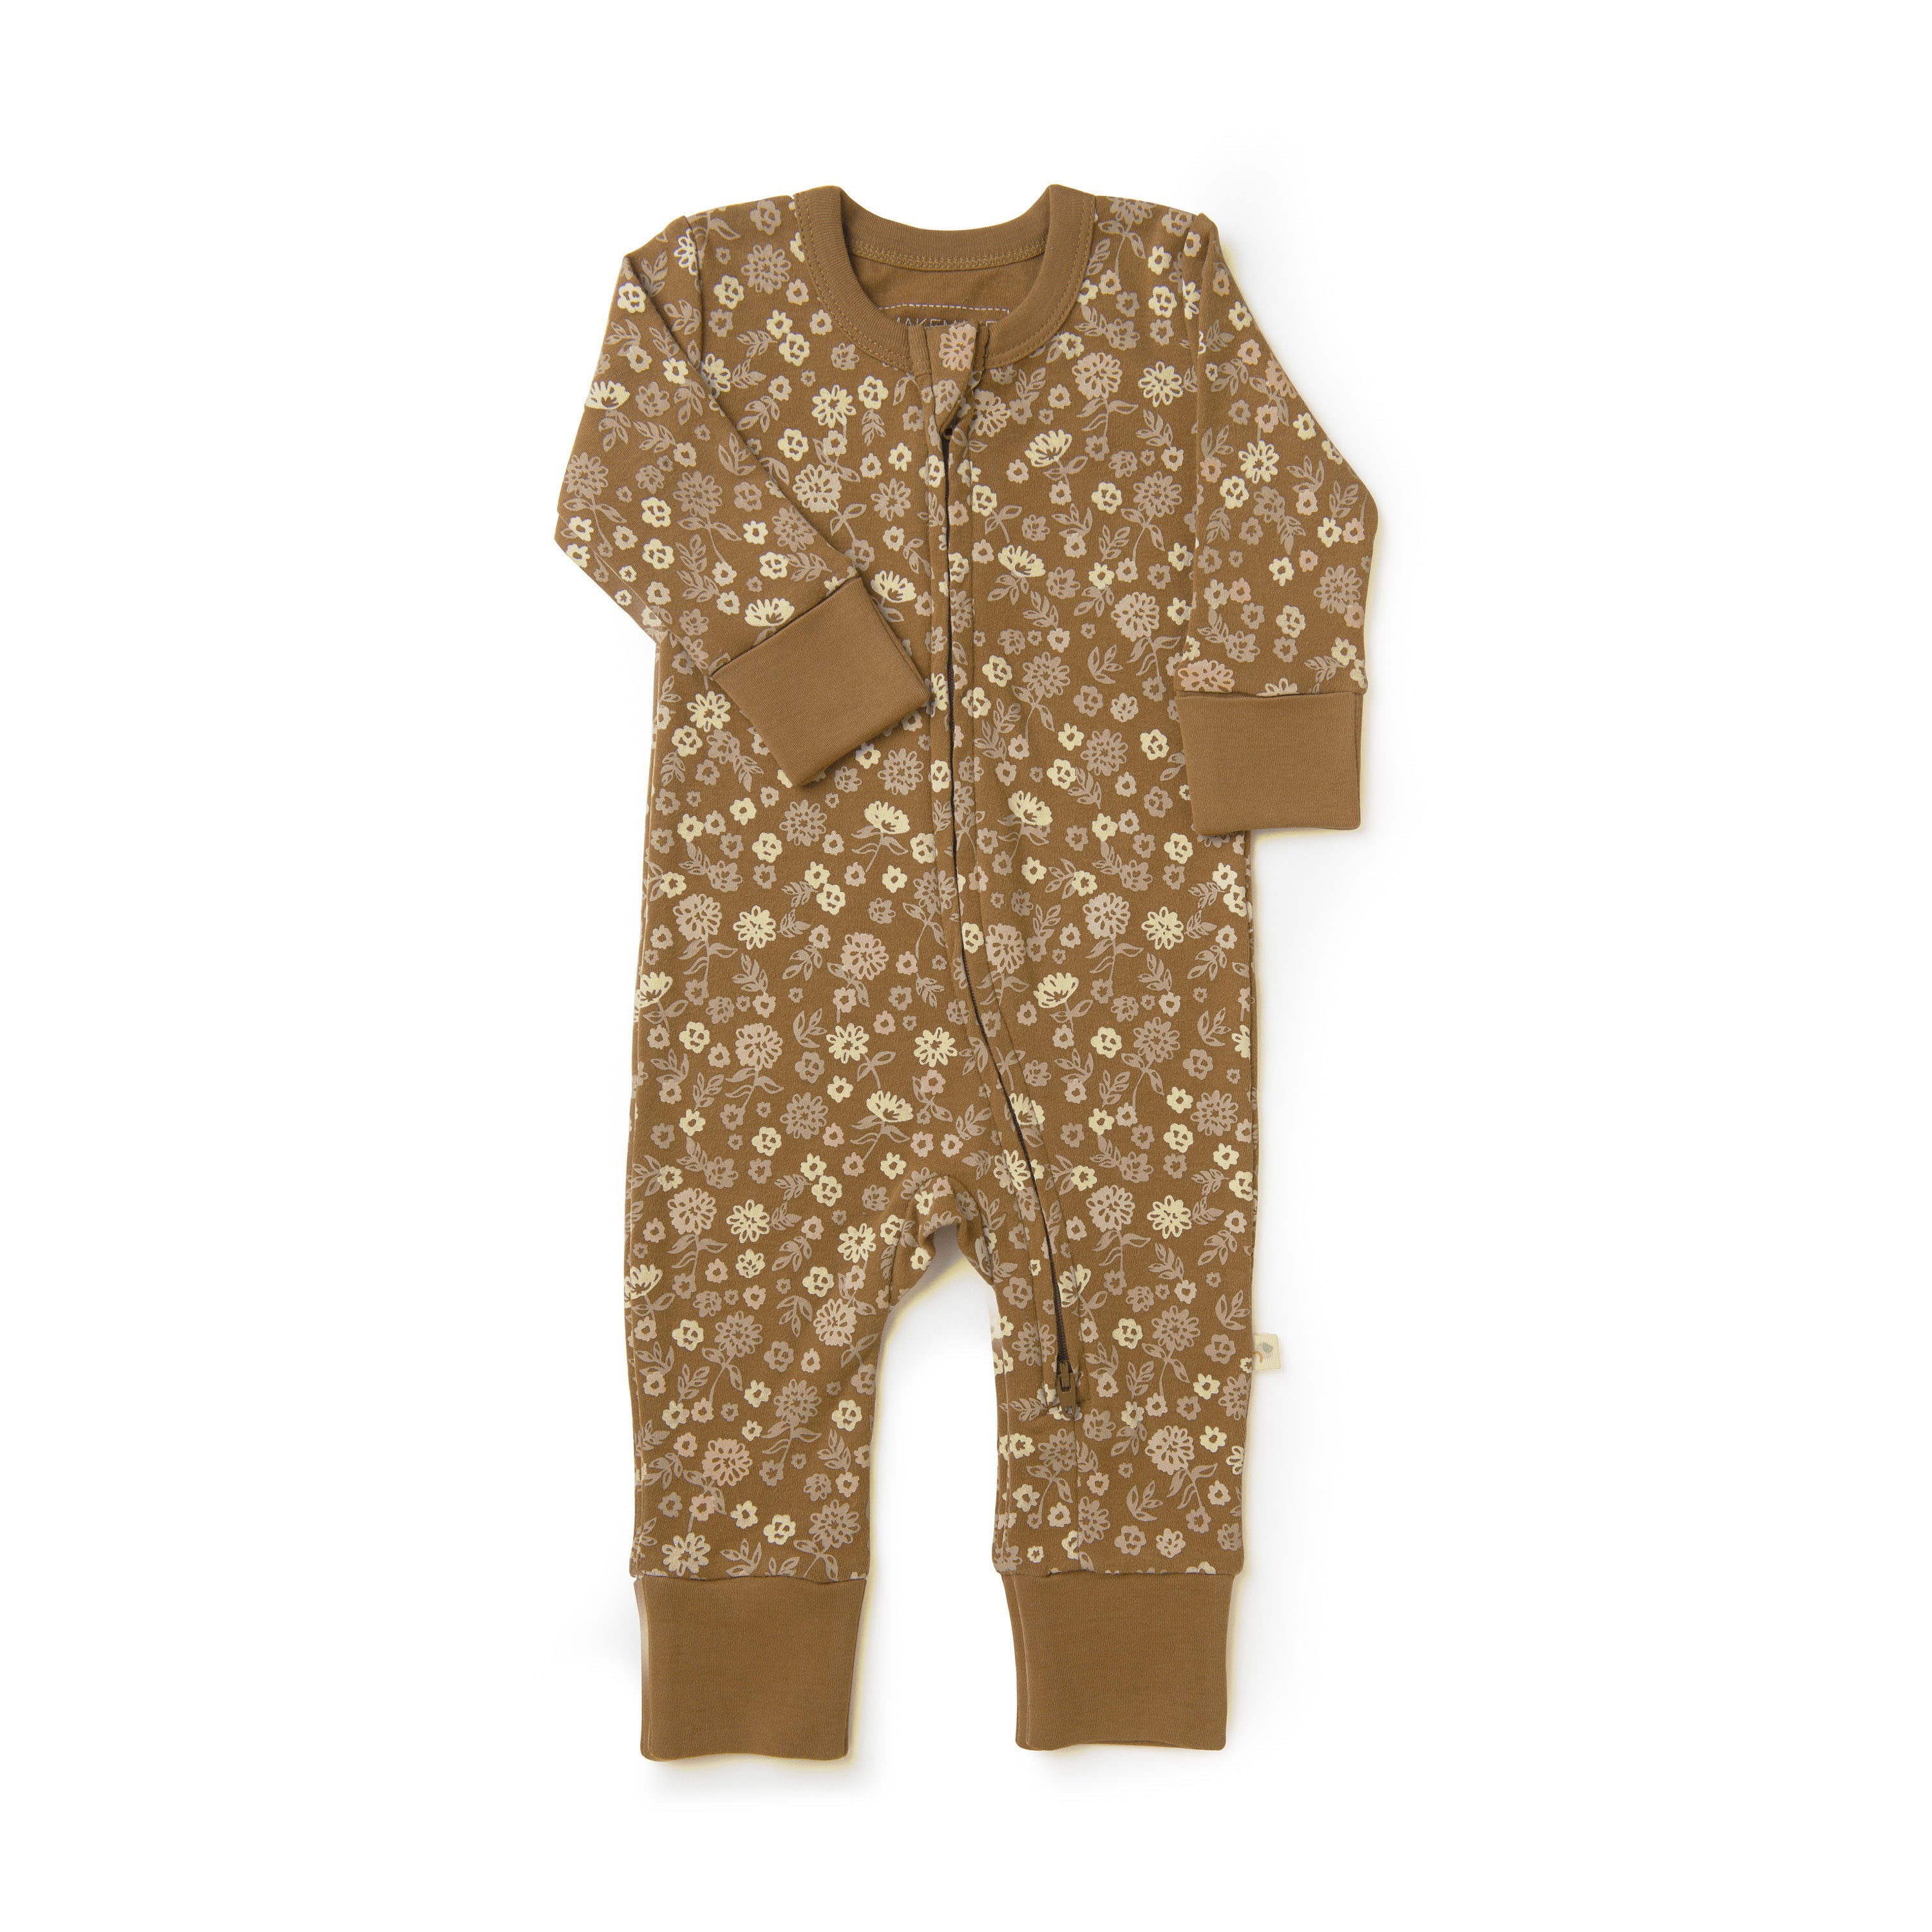 Baby's olive-green Organic 2-Way Zip Romper - Wildflower, featuring a snap button front and cuffed sleeves, displayed on a white background. (Brand Name: Organic Baby)